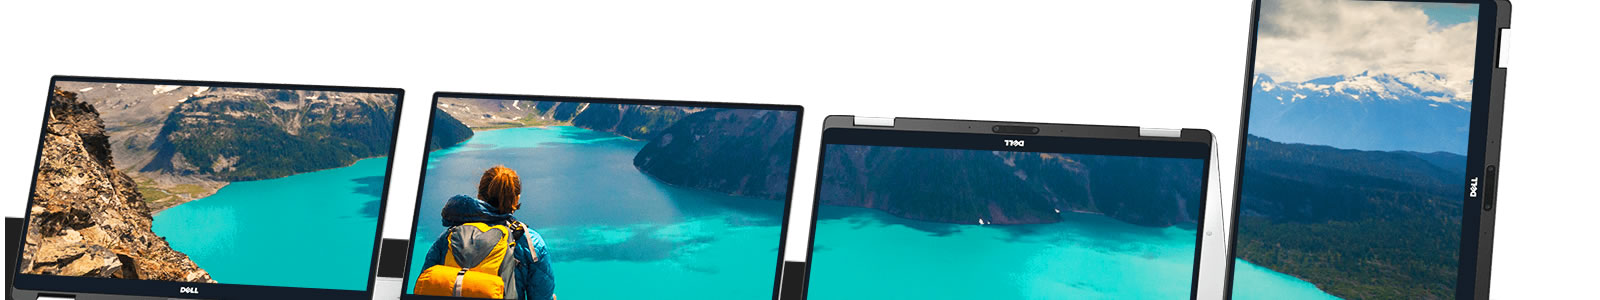 DELL New XPS 13 2-in-1 banner